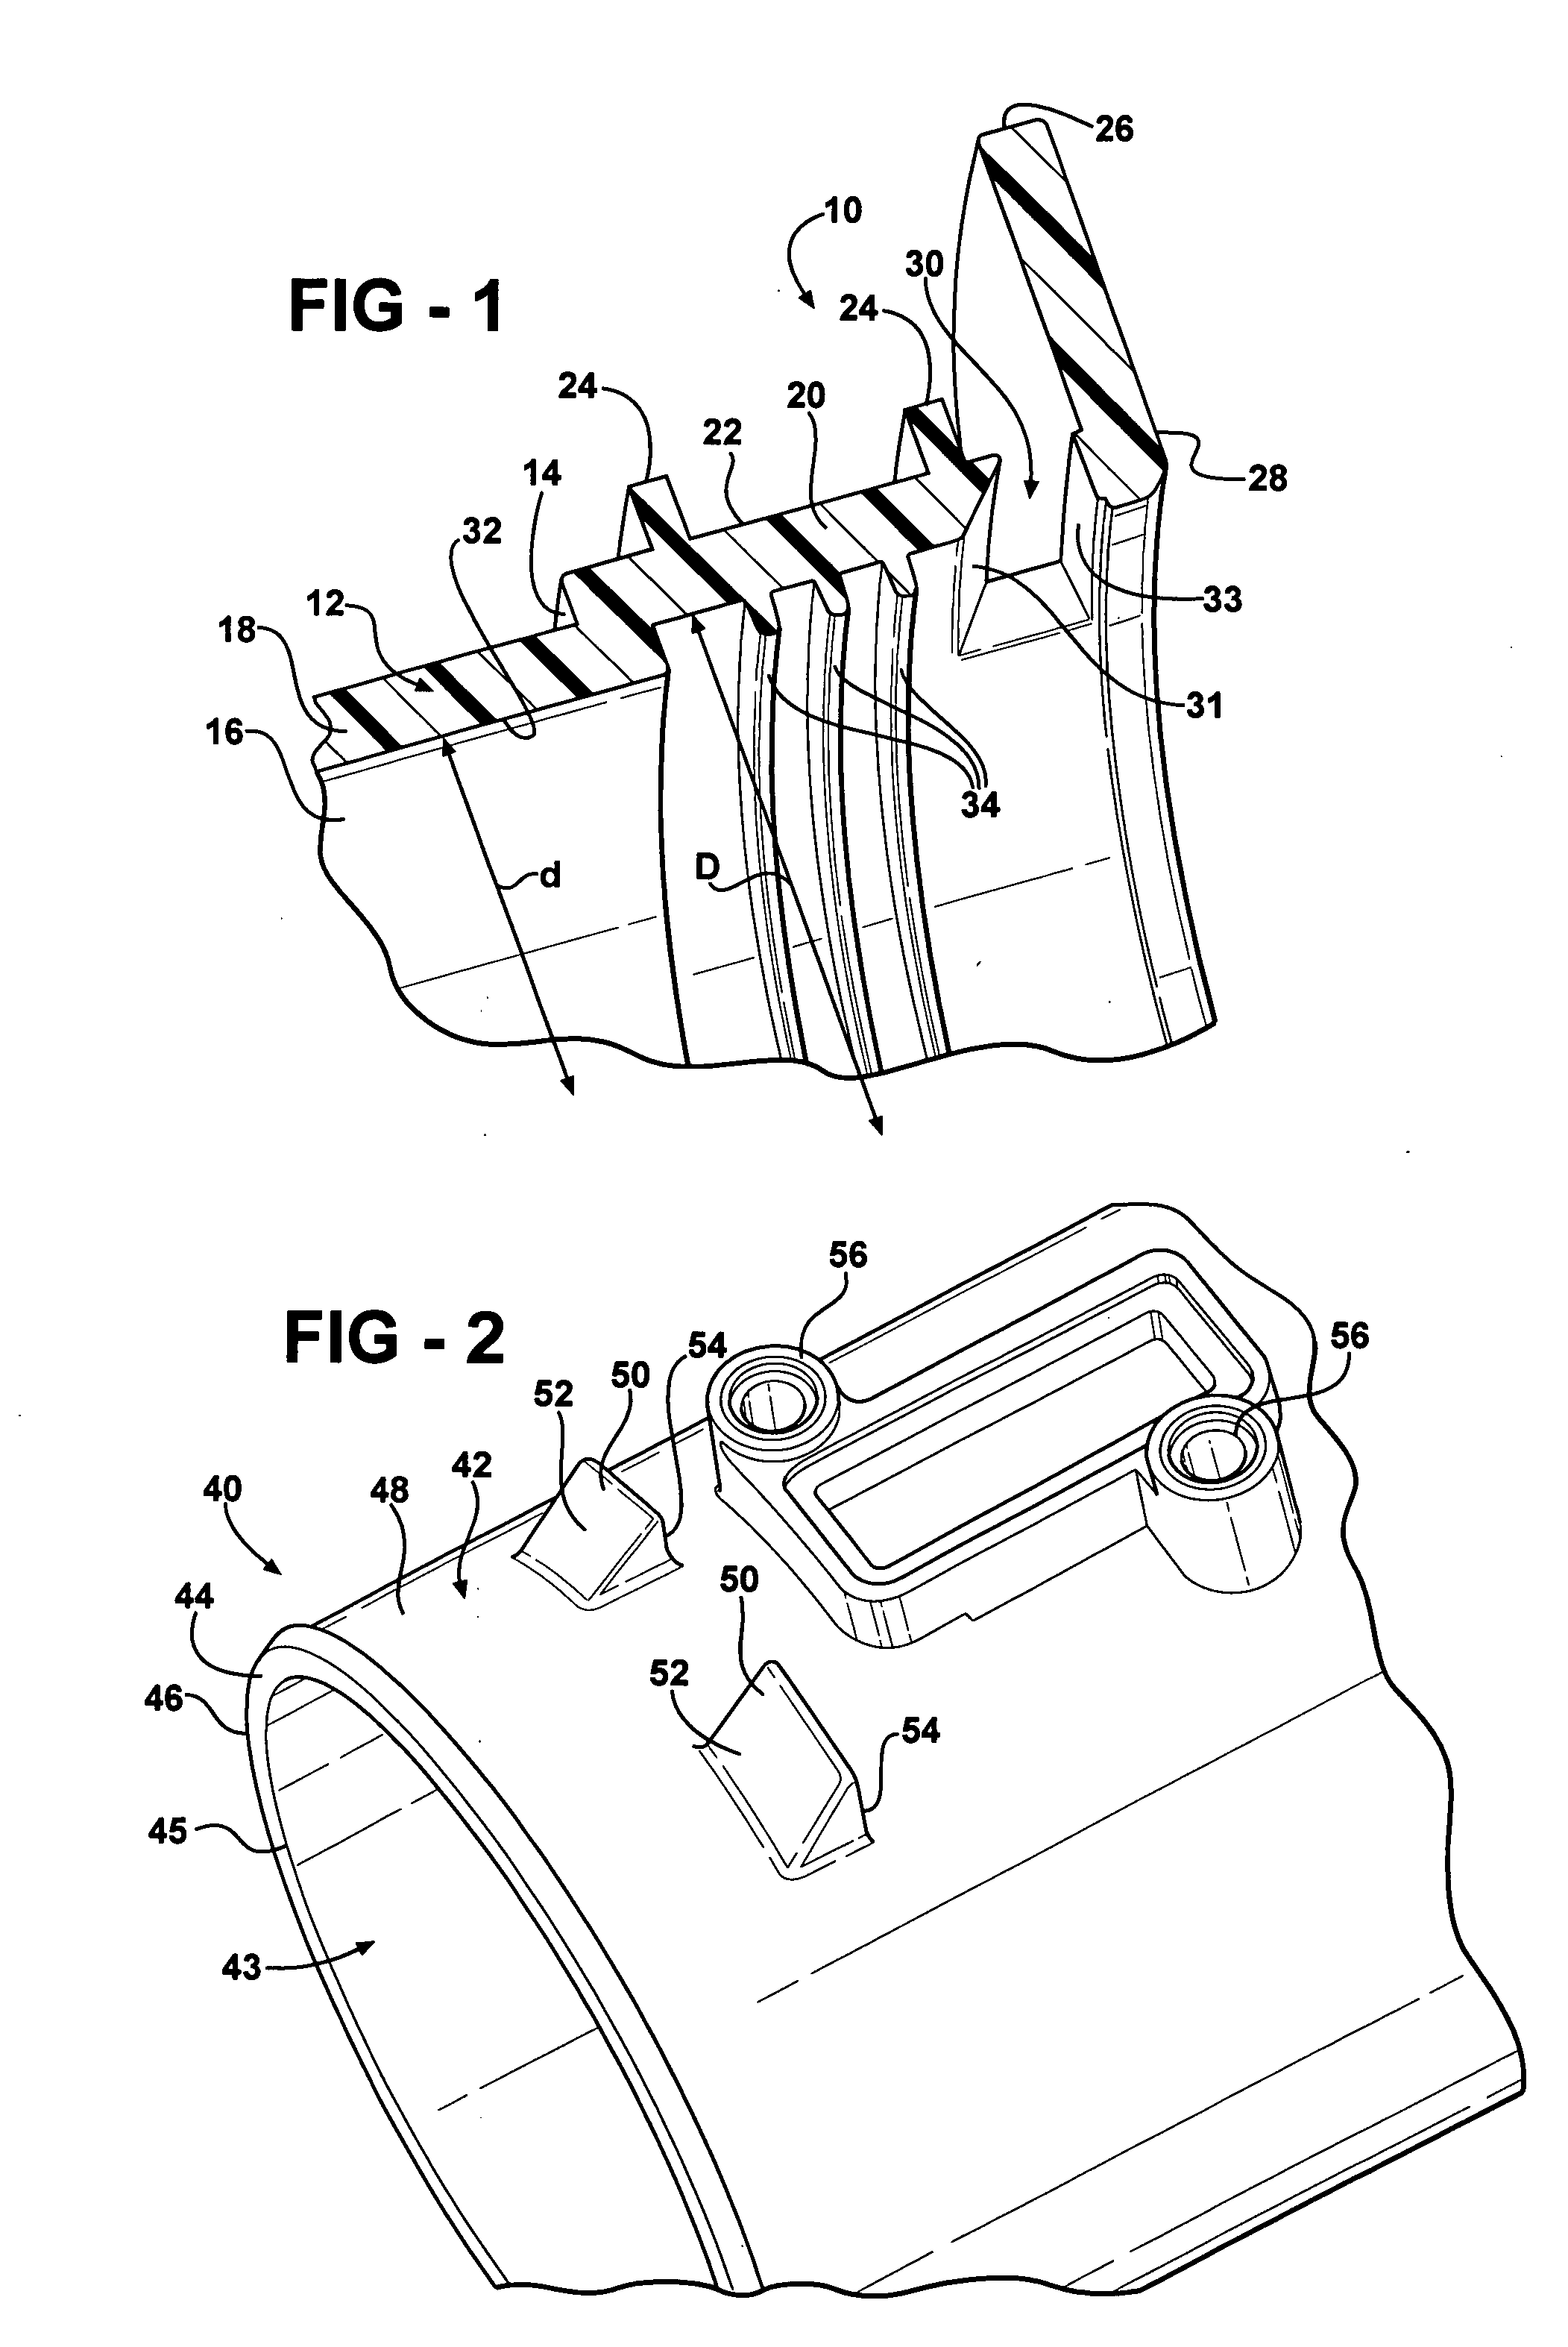 Clampless tube connection with integrated sealing and locking feature